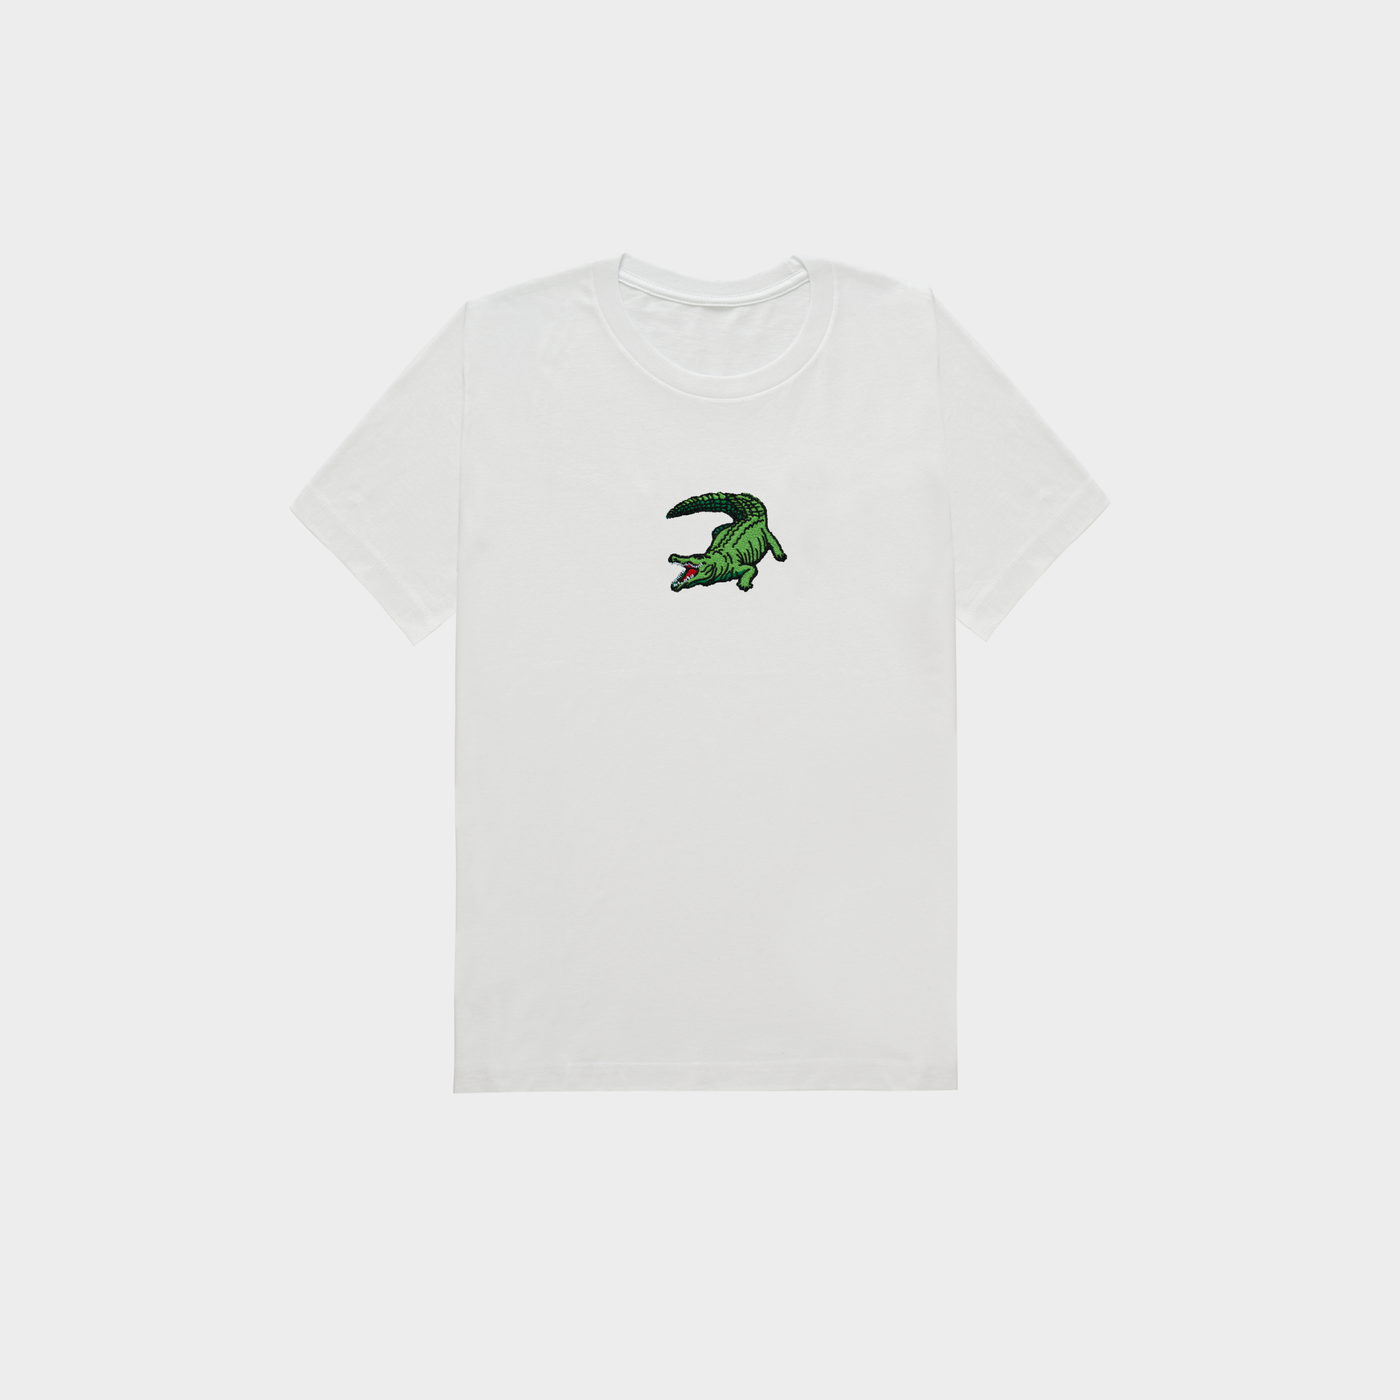 Bobby's Planet Kids Embroidered Saltwater Crocodile T-Shirt from Australia Down Under Animals Collection in White Color#color_white